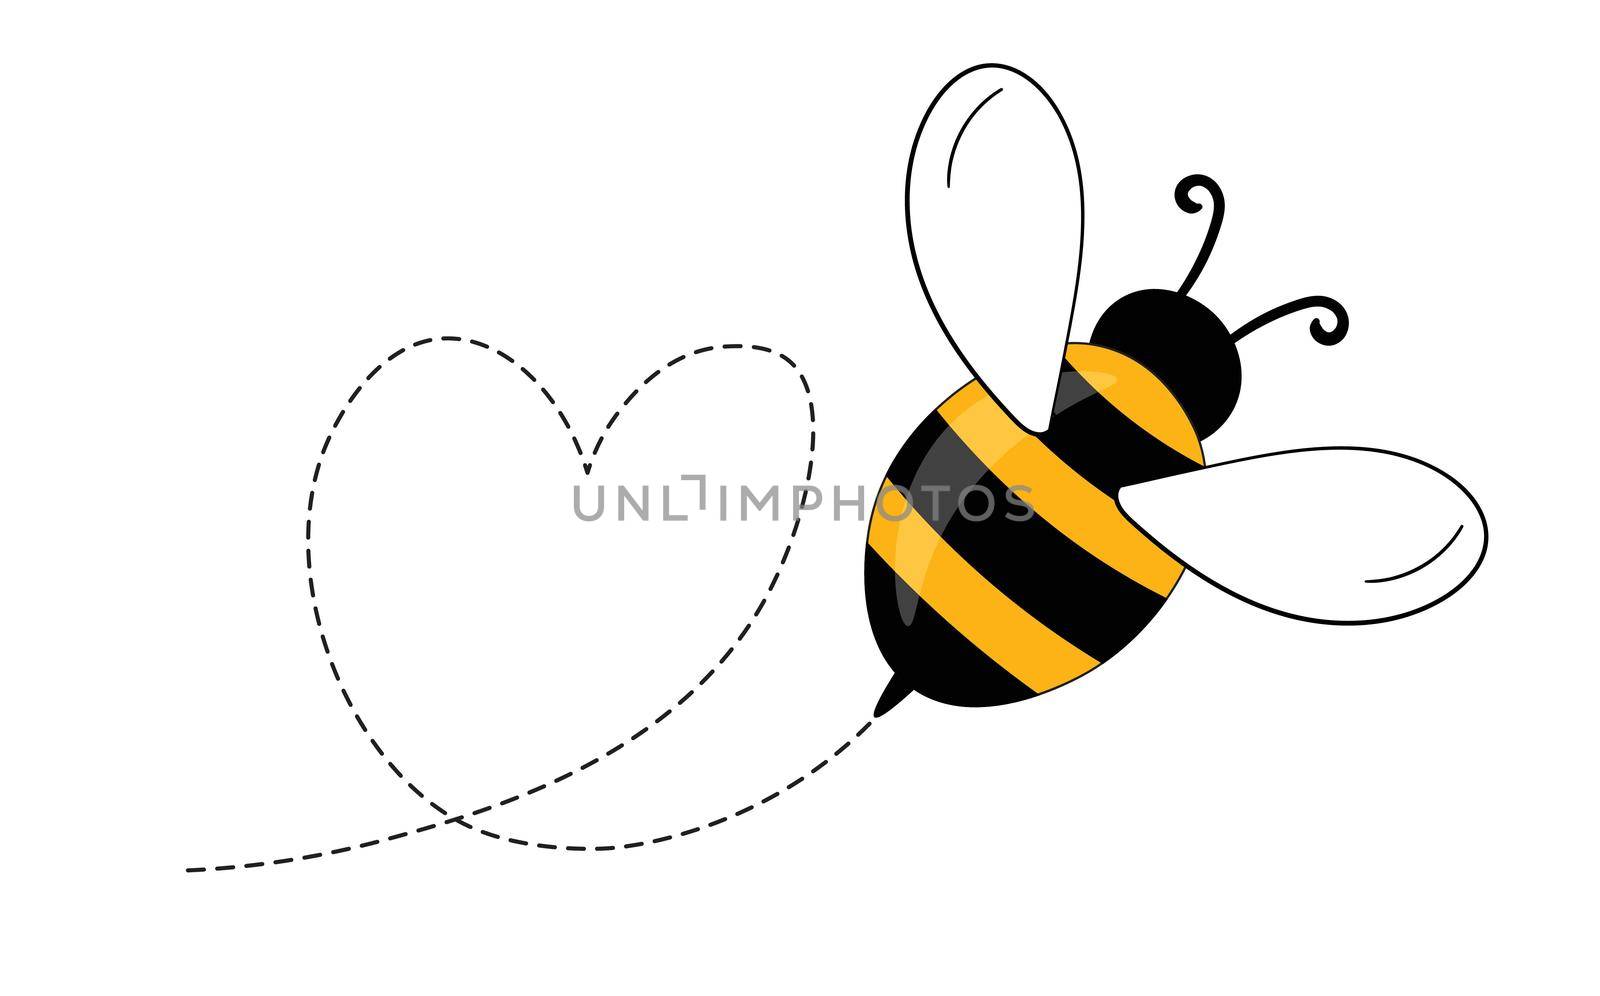 Cartoon bee mascot. A small bees flying on a dotted route. Wasp collection. Vector characters. Incest icon. Template design for invitation, cards. Doodle style.